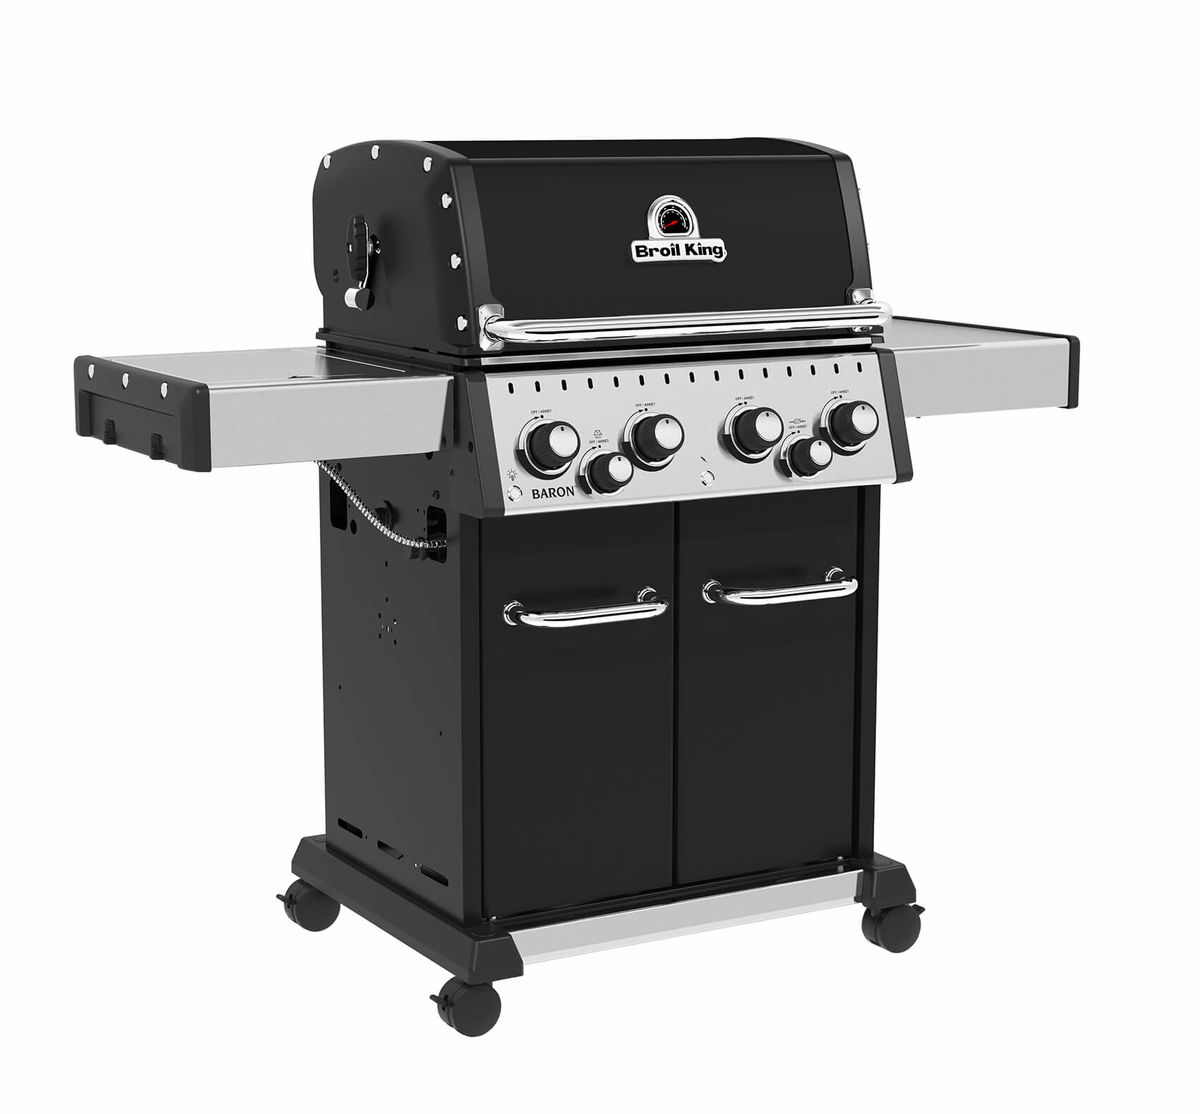 Image of Broil King Baron 490 Gasgrill bei nettoshop.ch